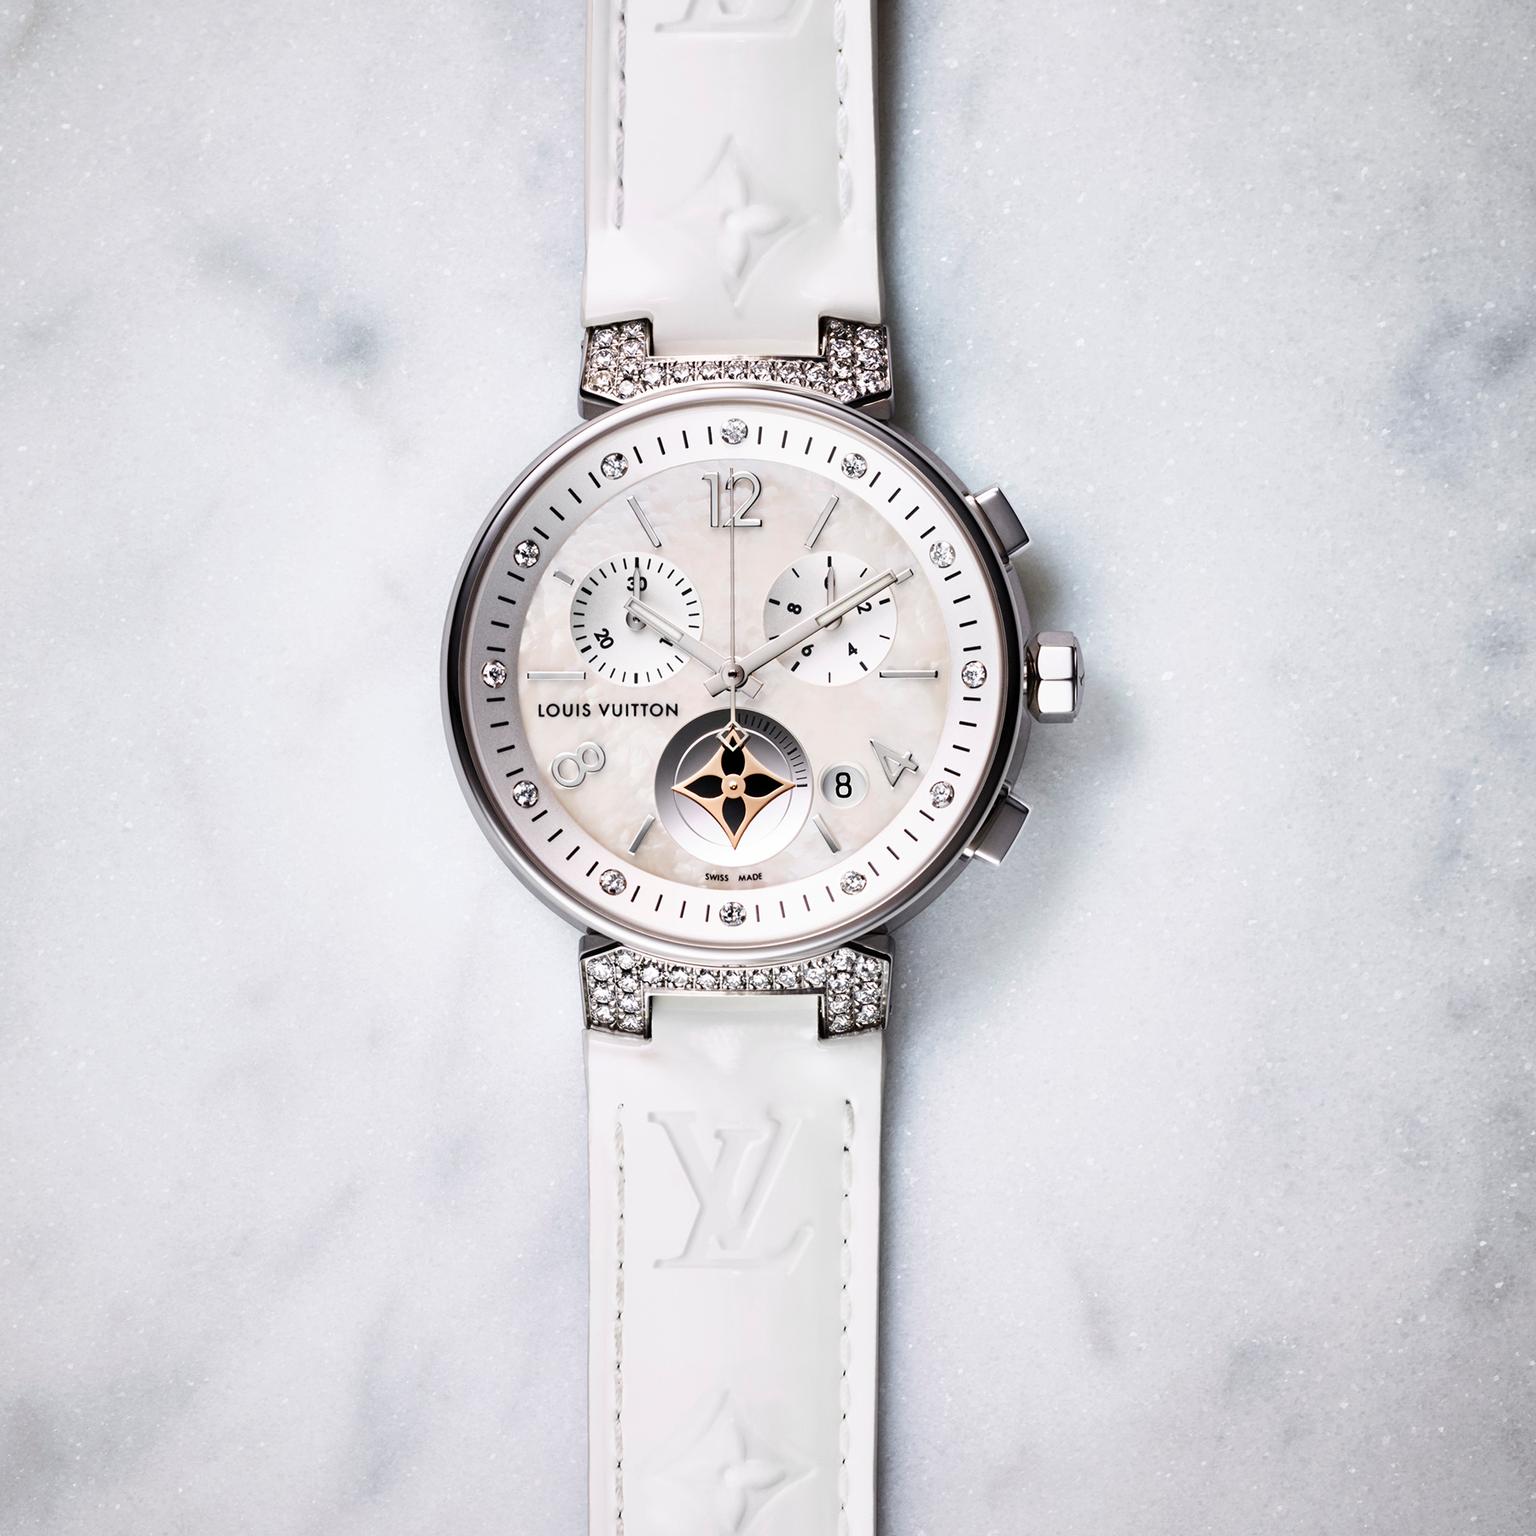 Louis Vuitton Tambour Moon Star Chronograph white with mother of pearl and diamonds